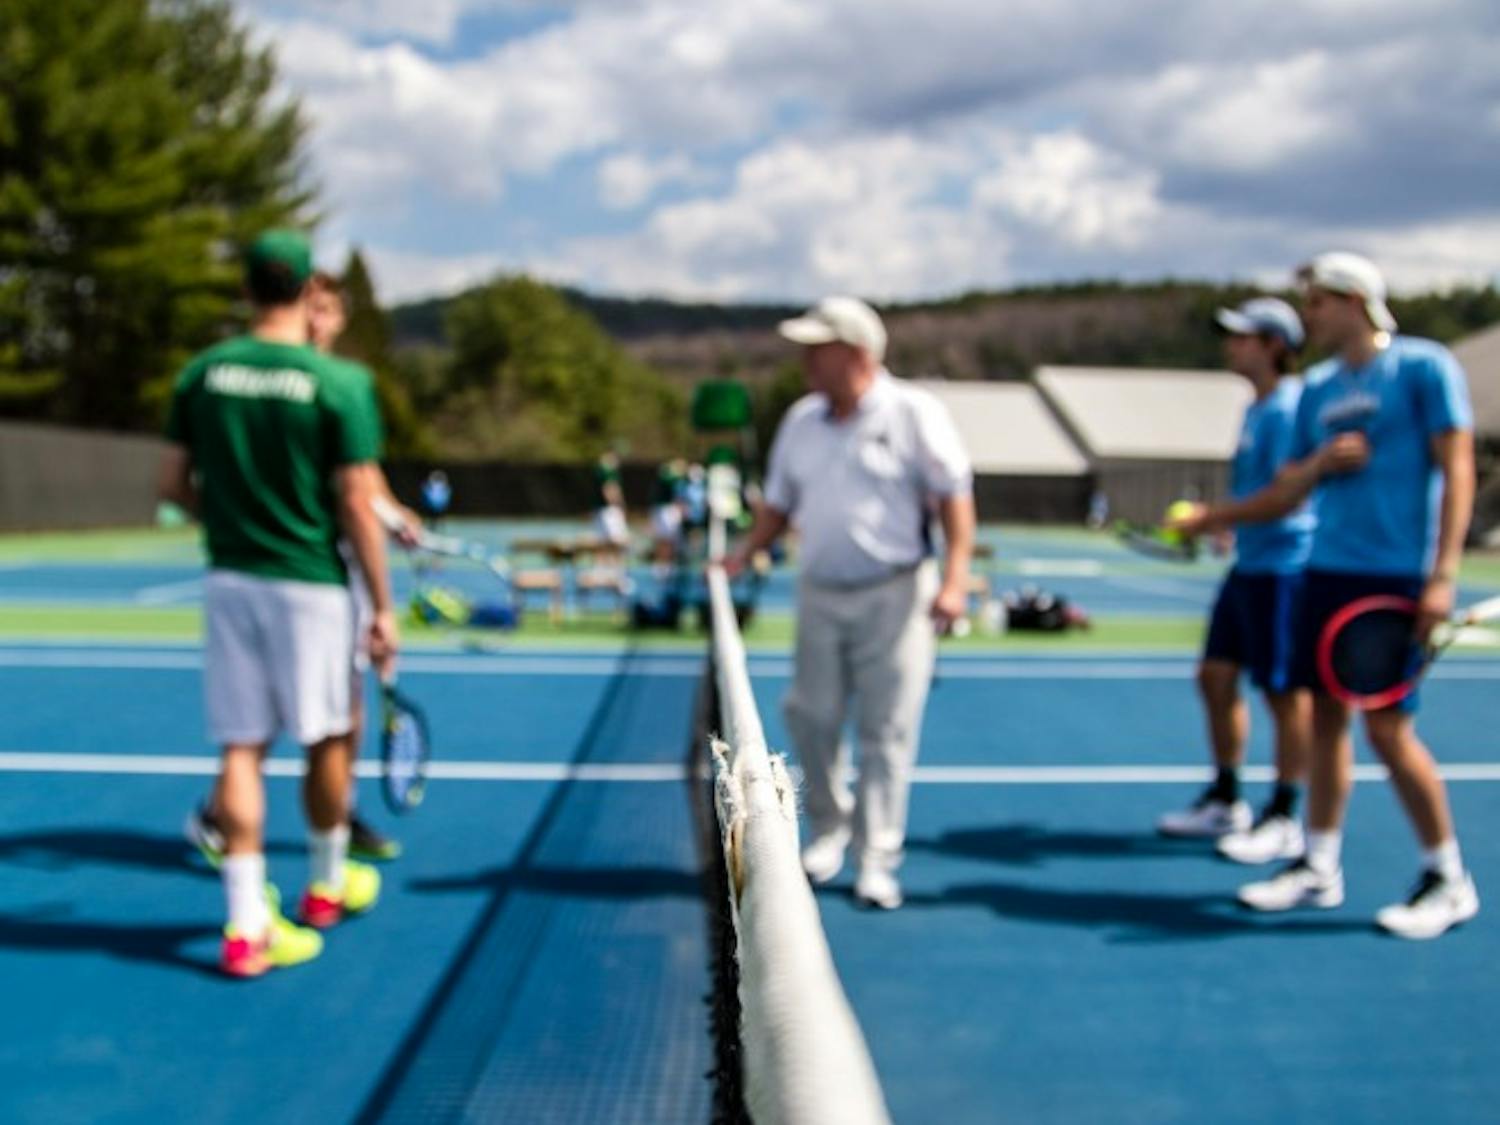 The tennis coach speaks to players during a cloudy day's practice.